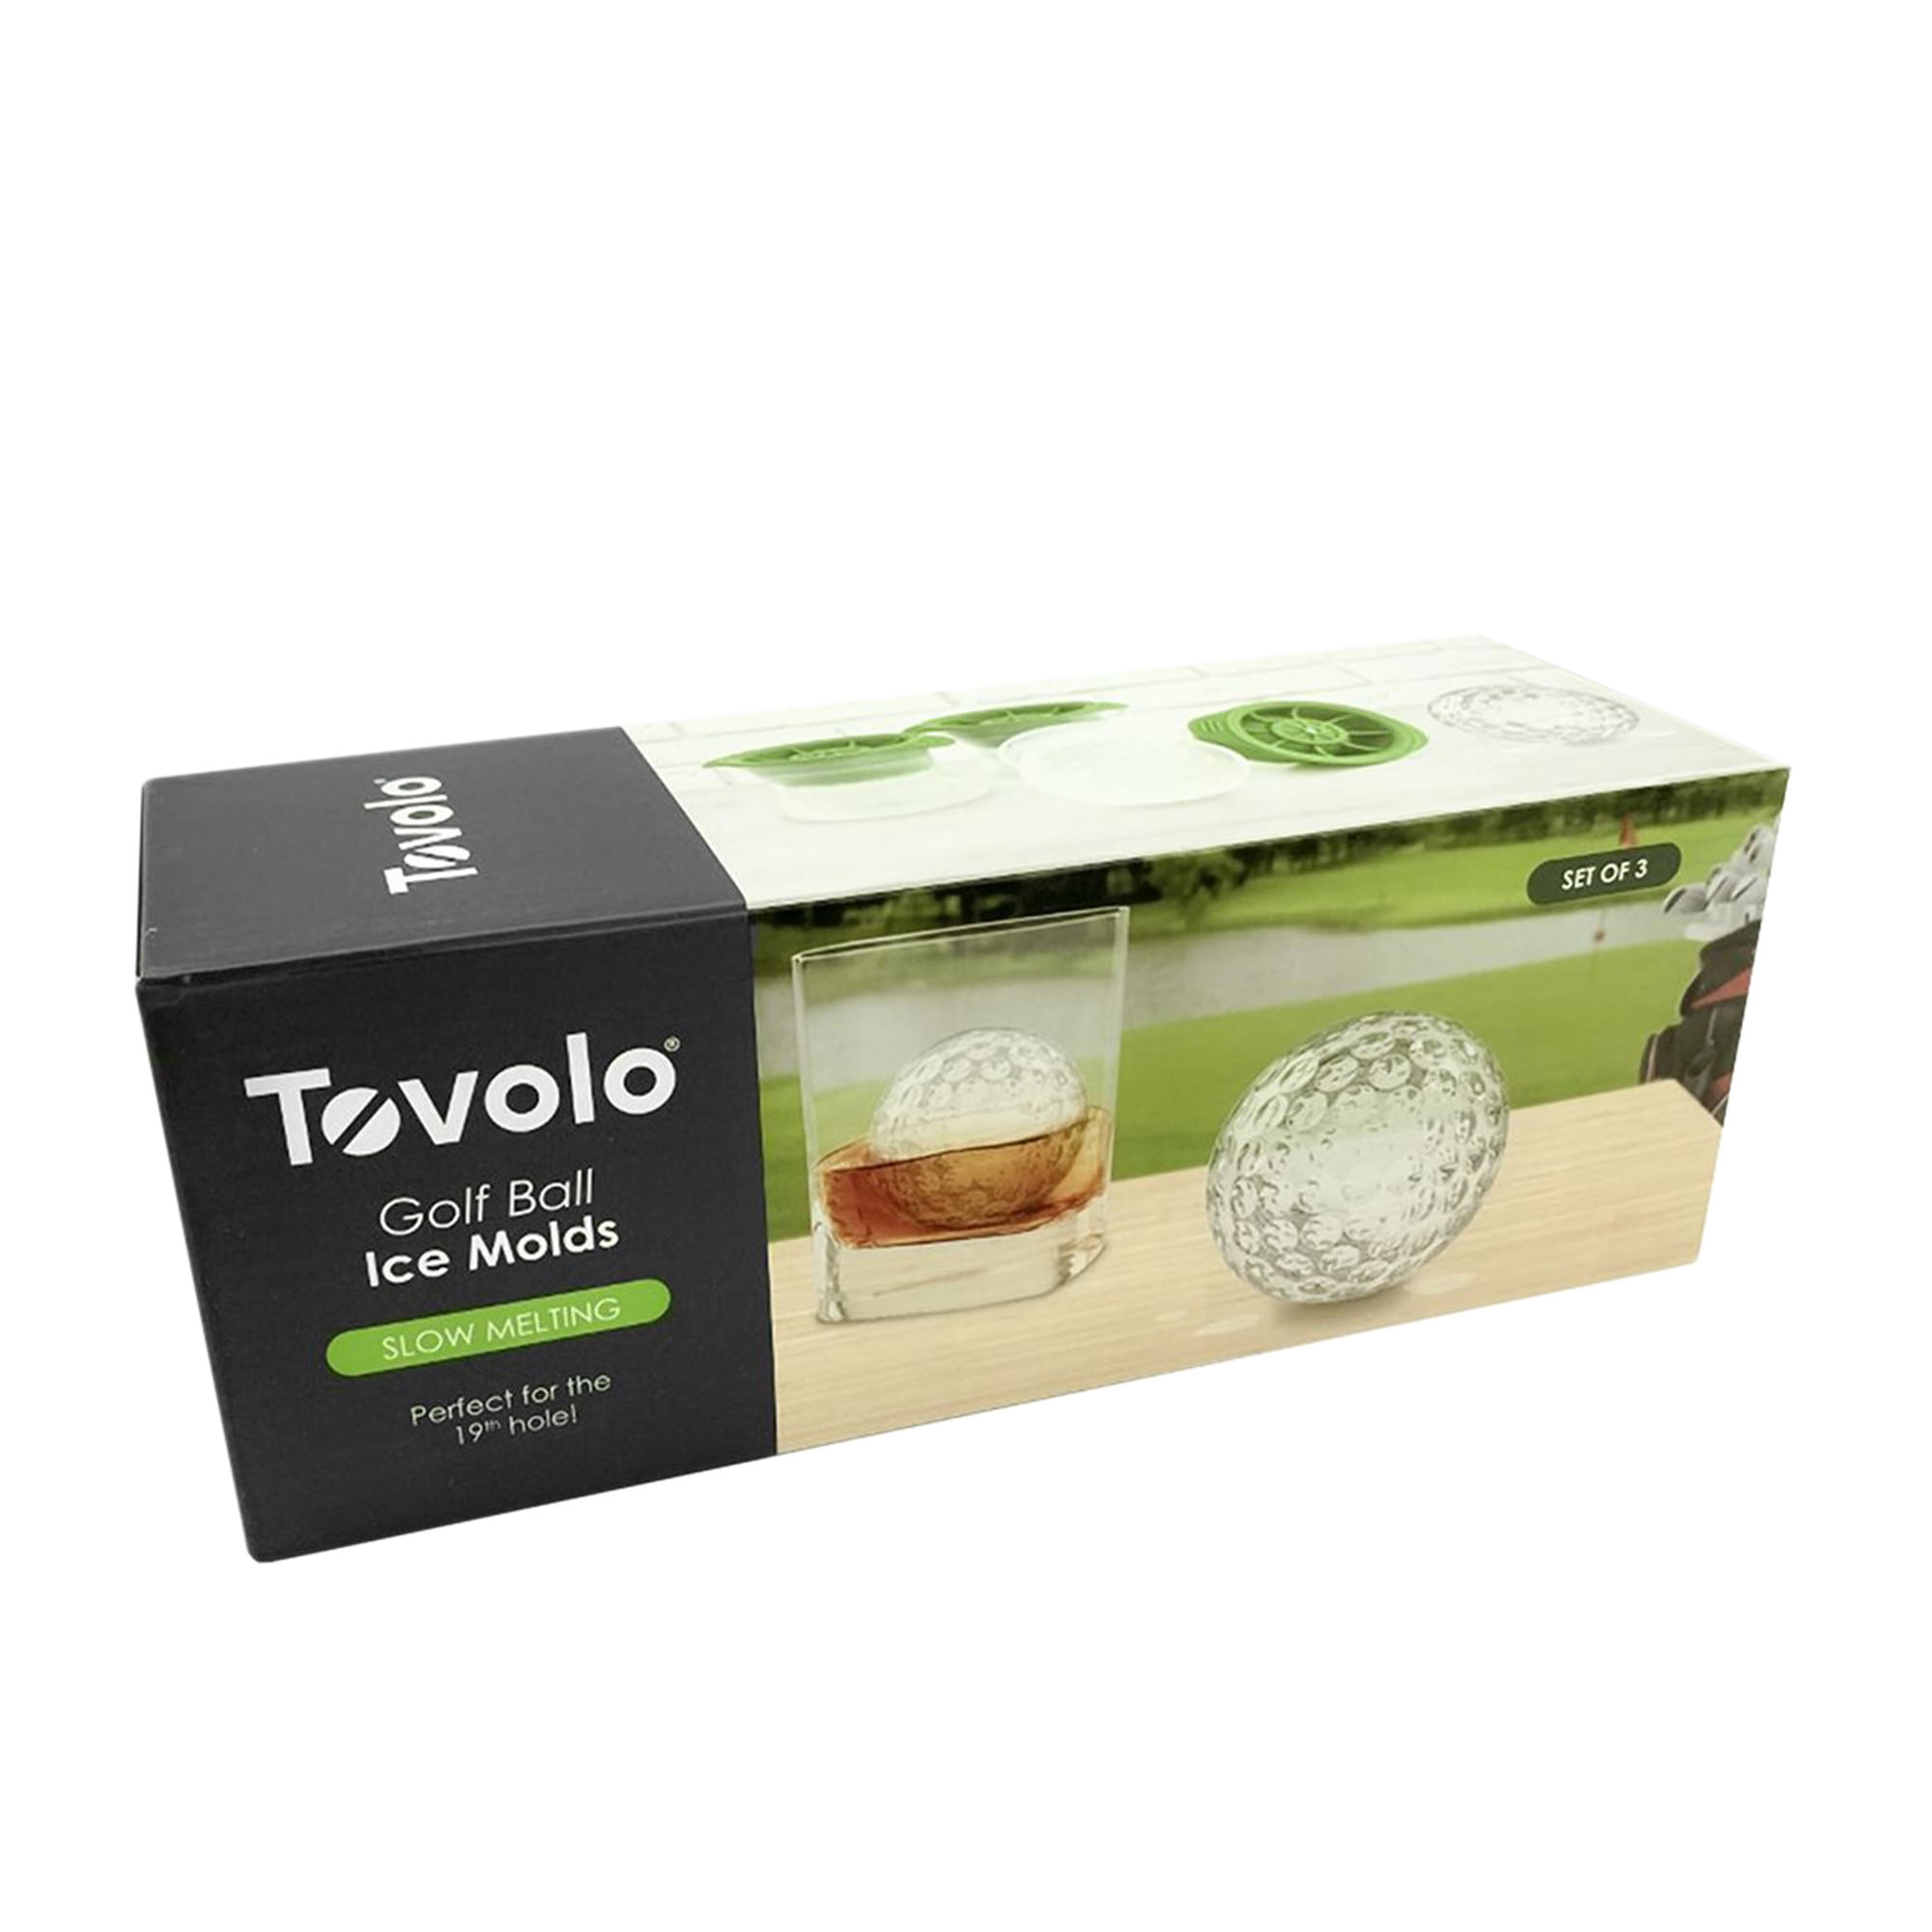 Tovolo Golf Ball Ice Mould Set of 3 Green Image 2